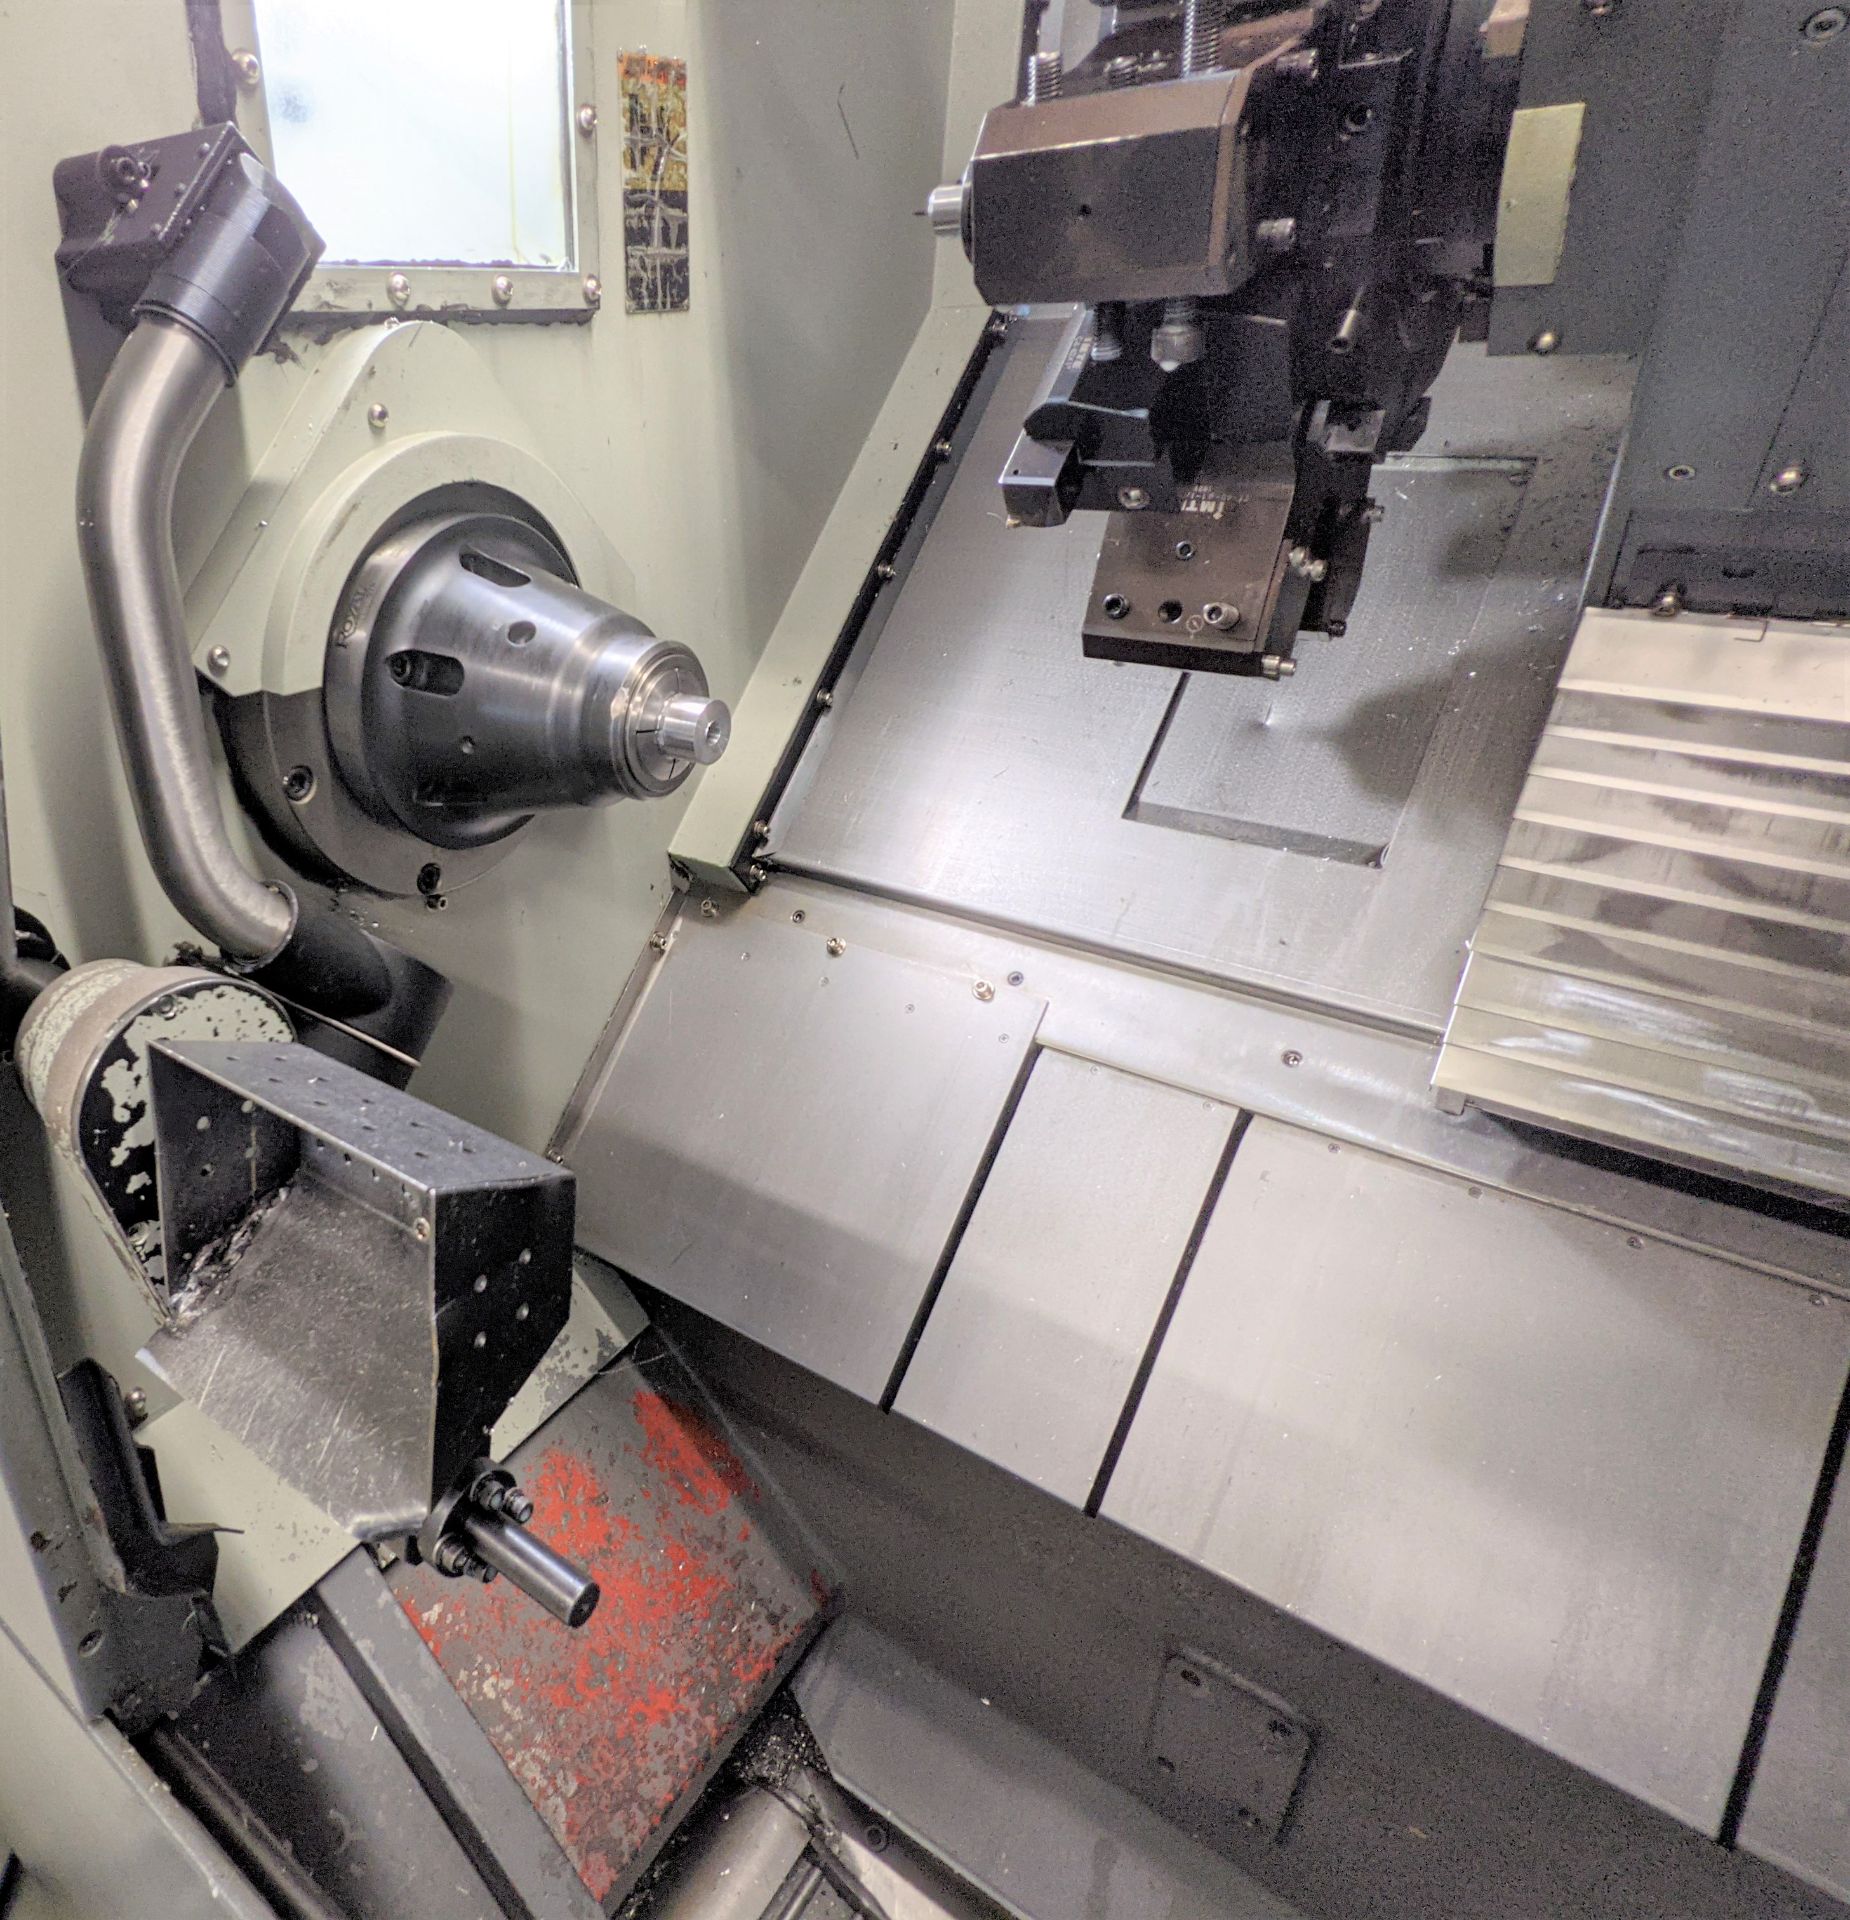 2006 HYUNDAI KIA SKT210Y CNC TURNING CENTER WITH FANUC 2TI-TB CNC CONTROL, 20” SWING OVER BED, 4,000 - Image 7 of 27